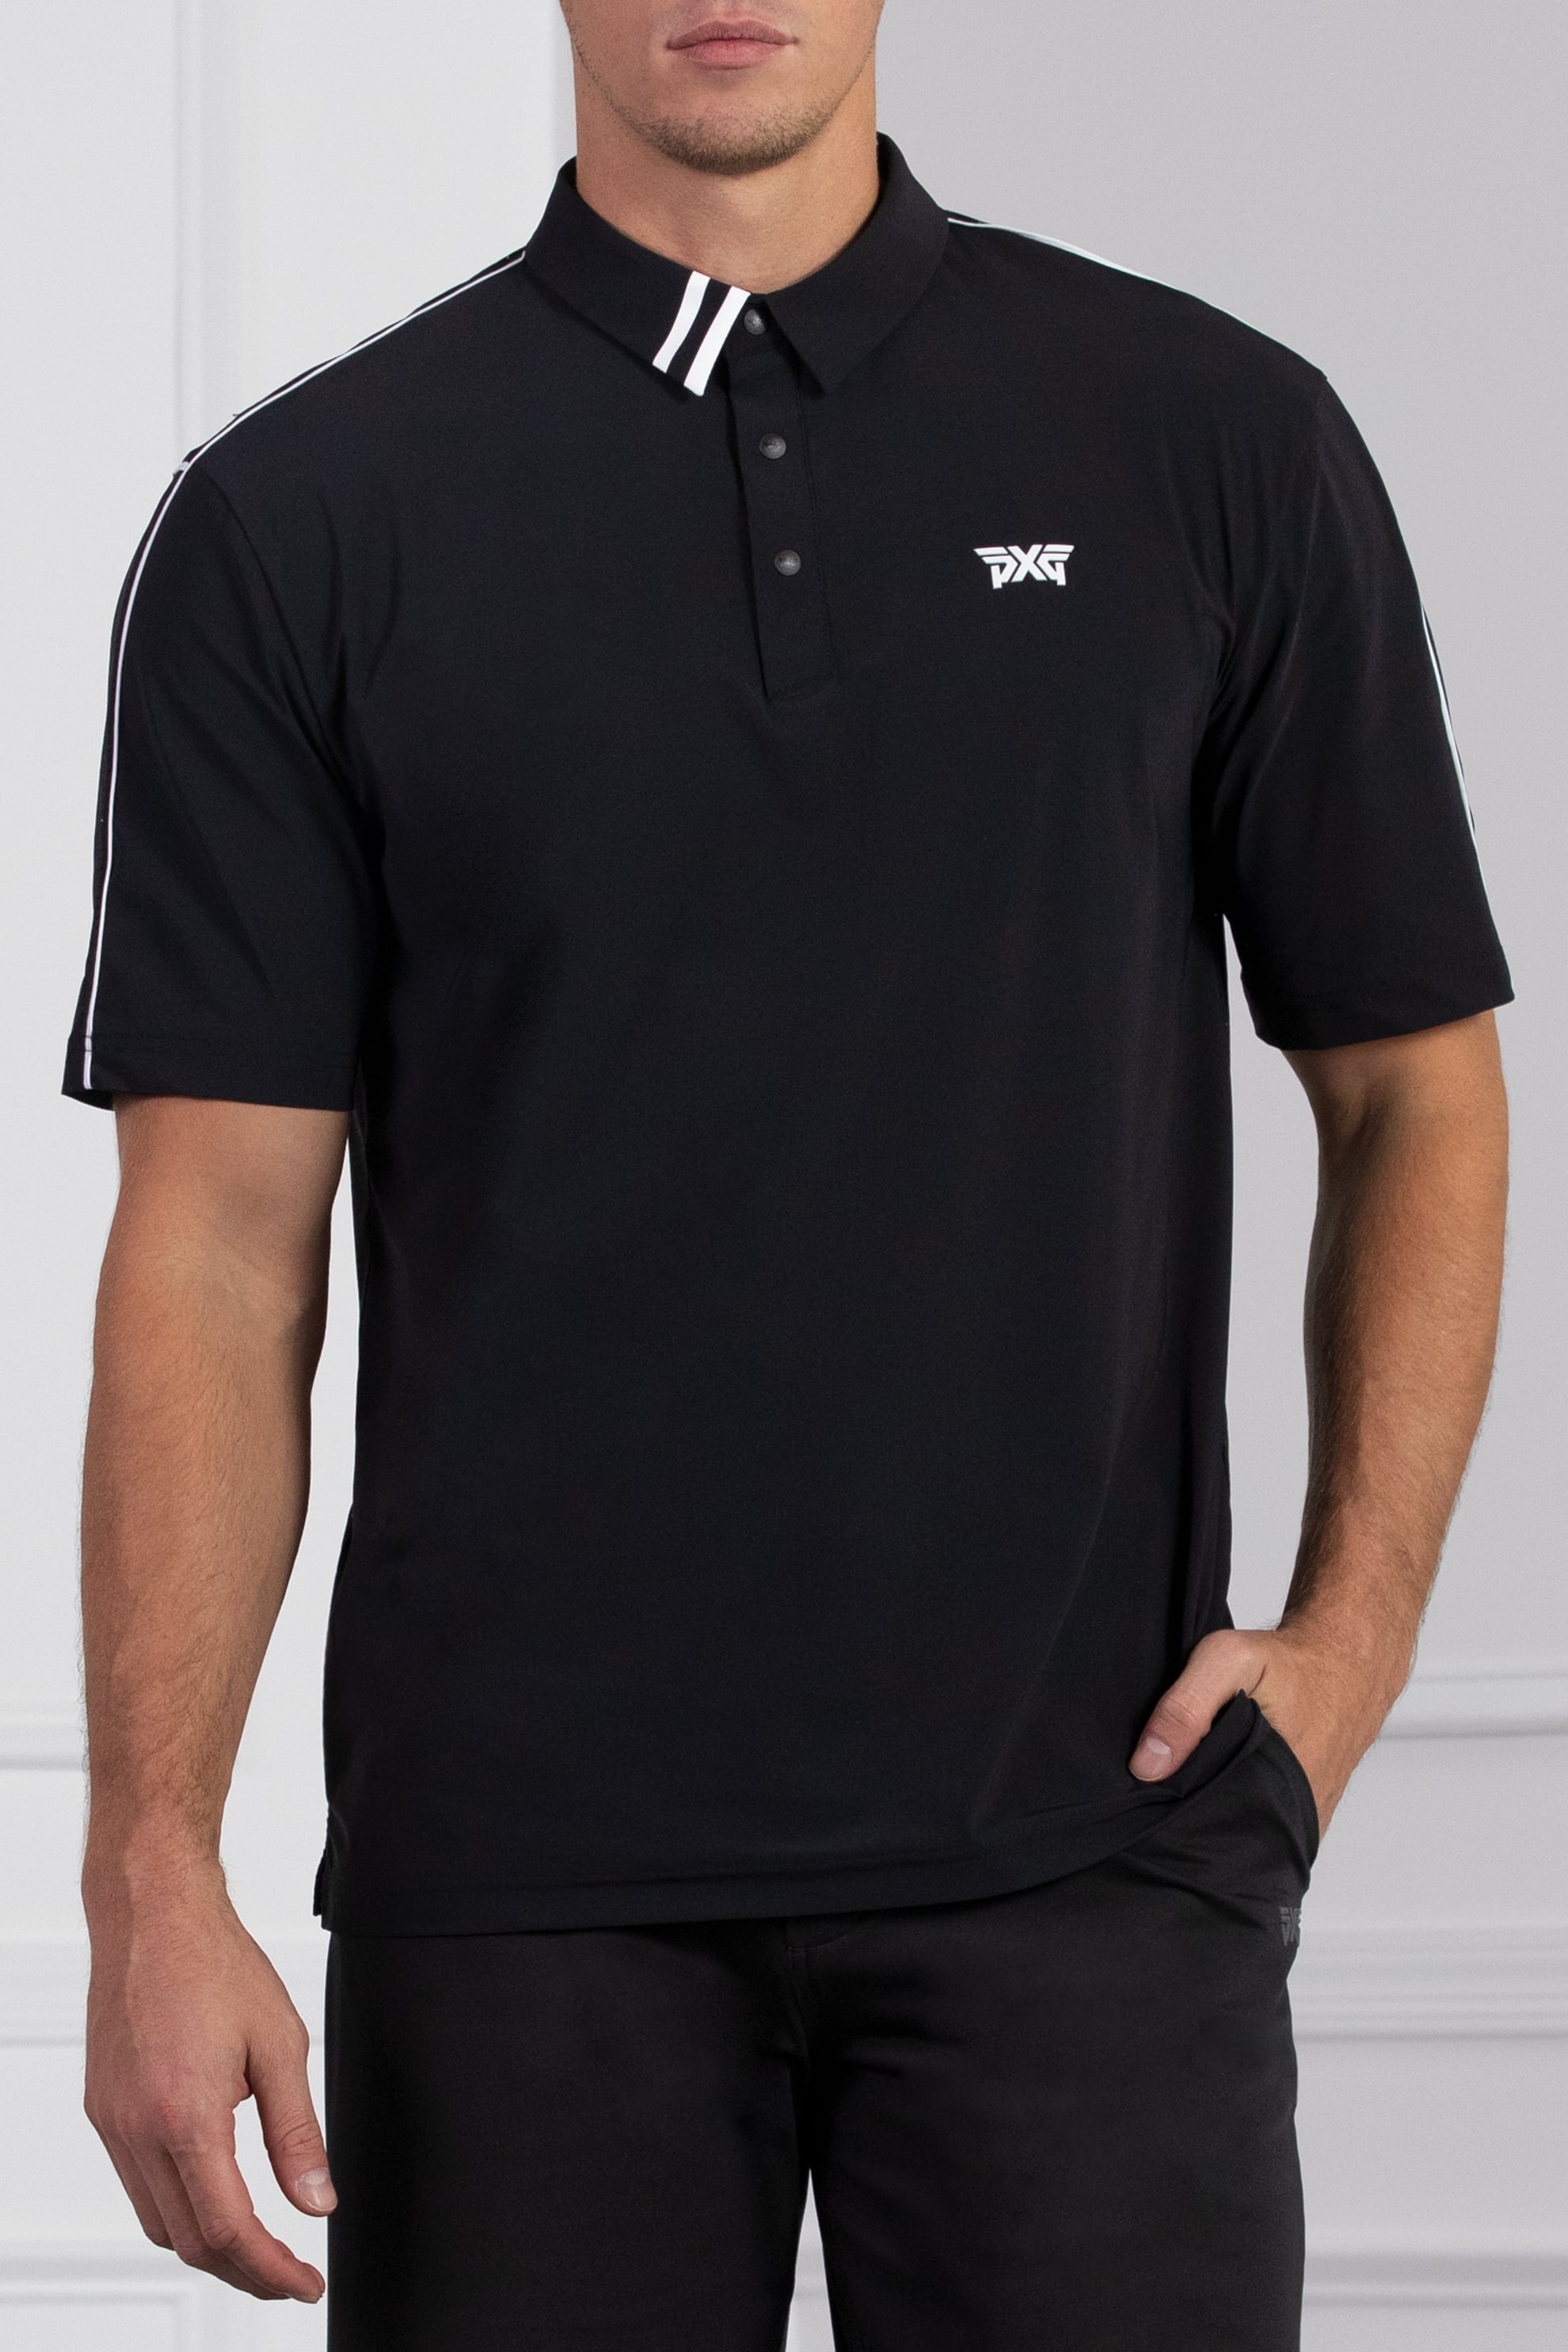 | at and PXG Golf Highest Fit Fineline Shop the Quality Polo Clubs Comfort Apparel, Accessories Gear, Golf